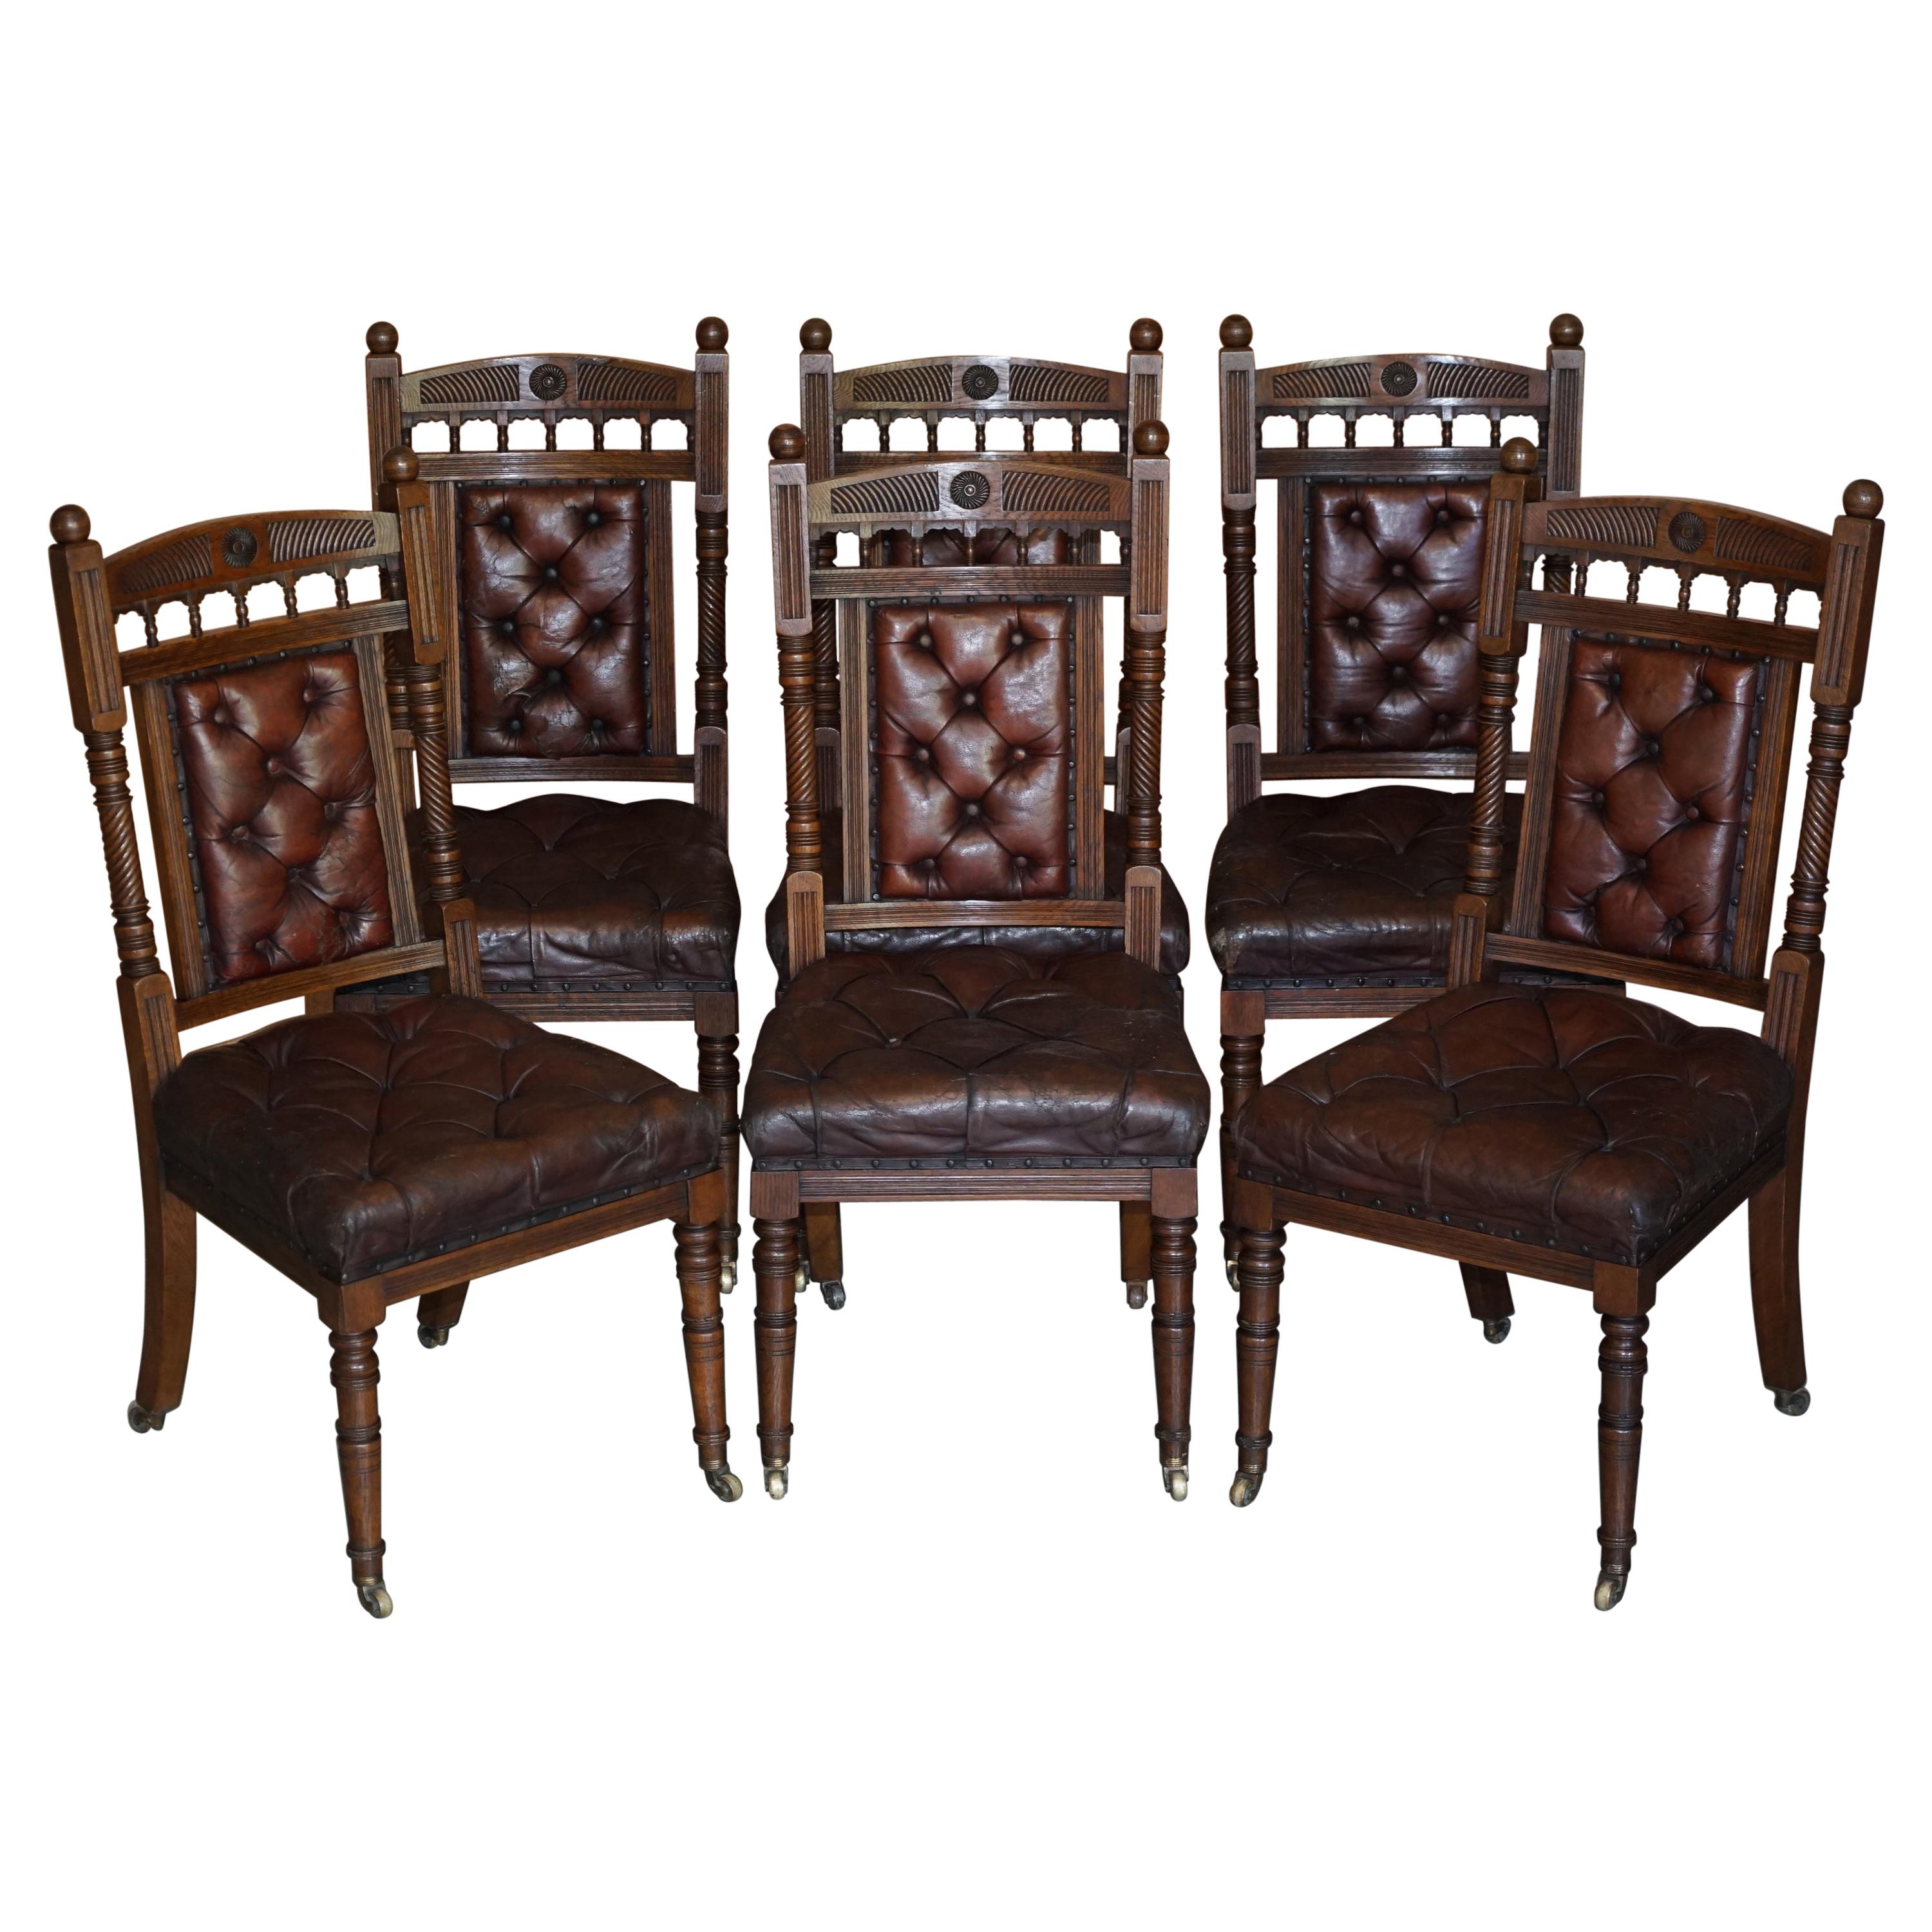 Six Brown Leather & Oak Antique Victorian Chesterfield Dining Chairs Restoration